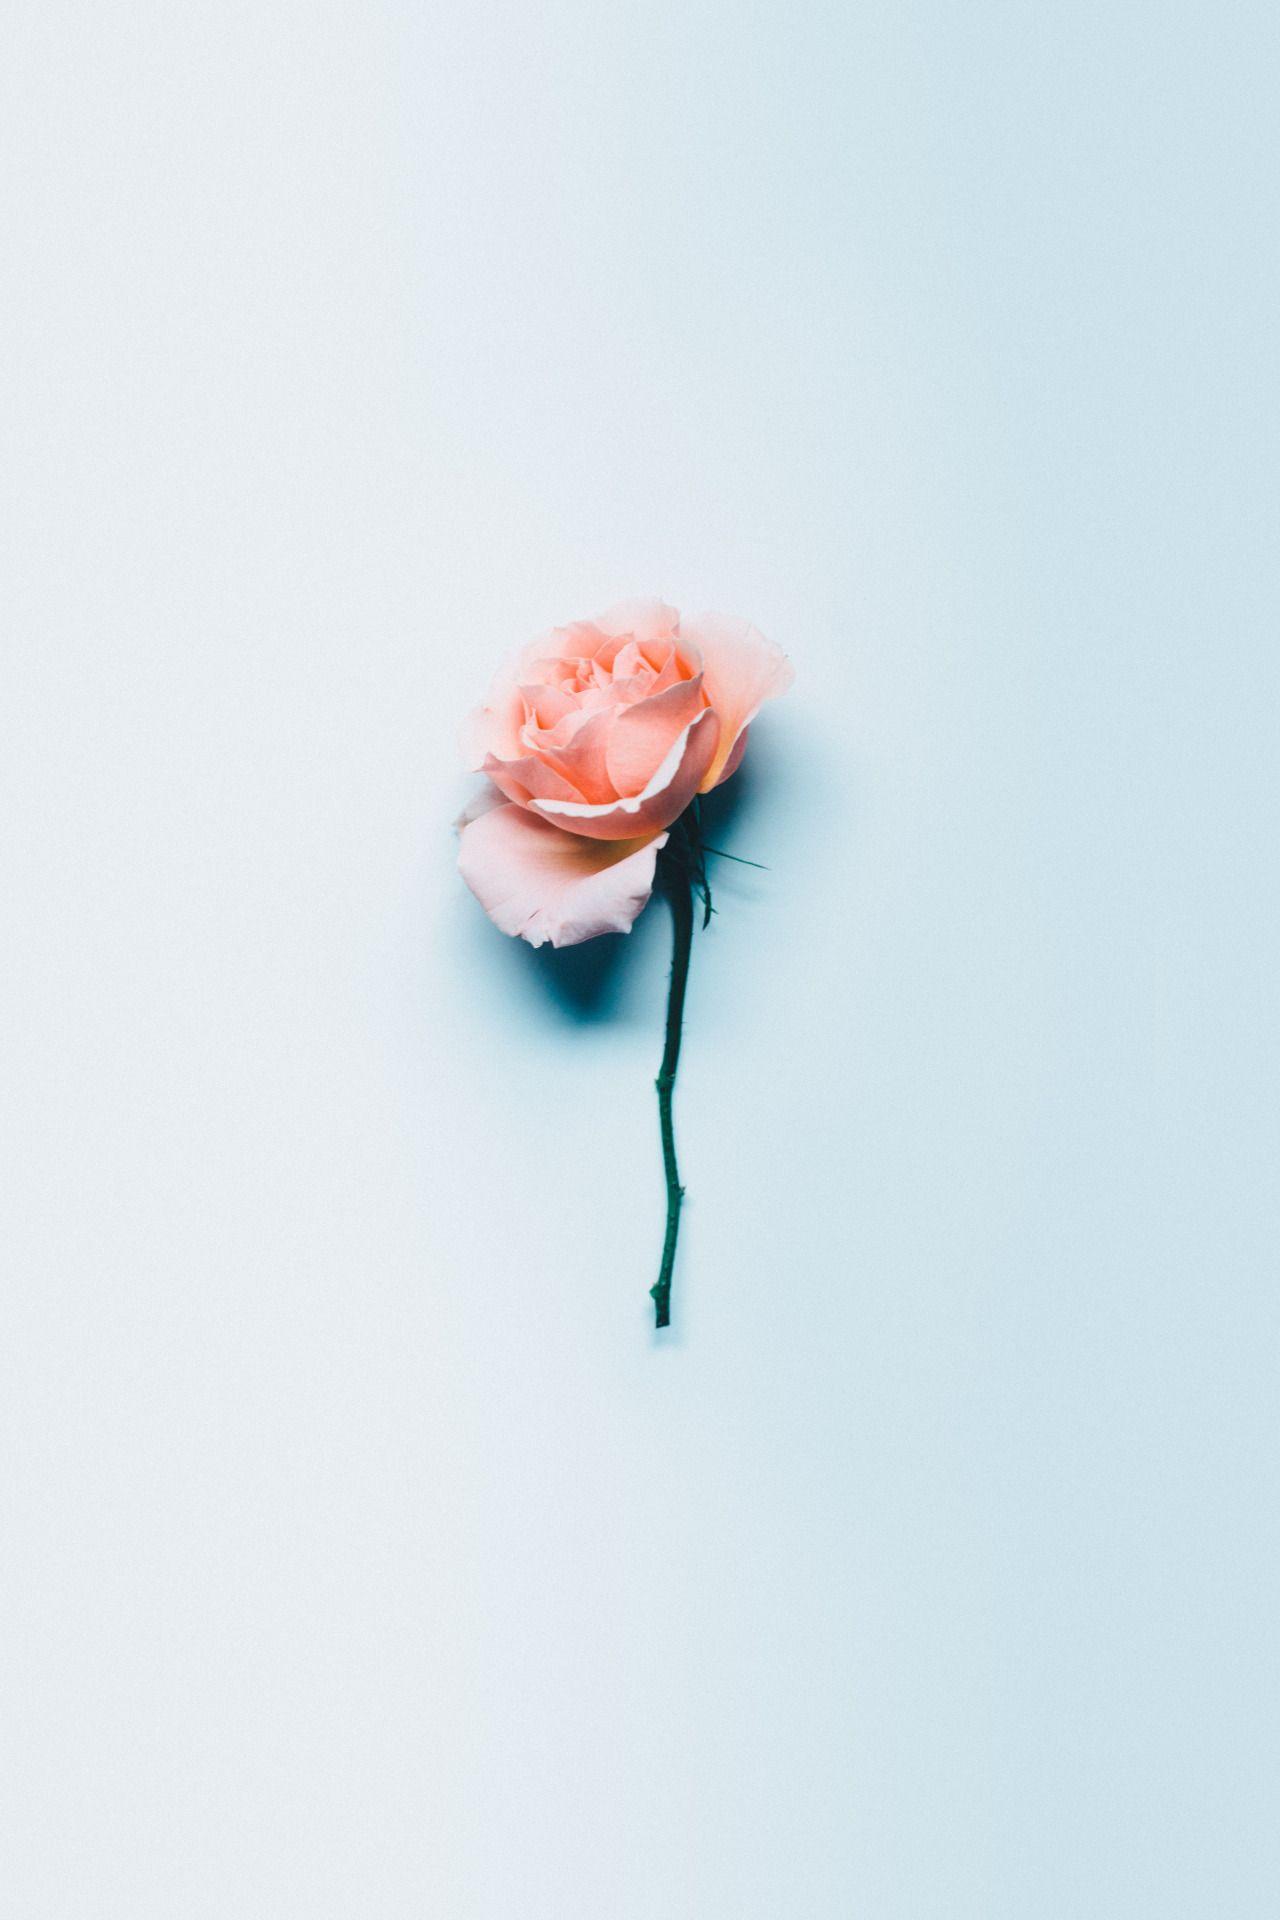 Blue Roses Aesthetic Wallpapers